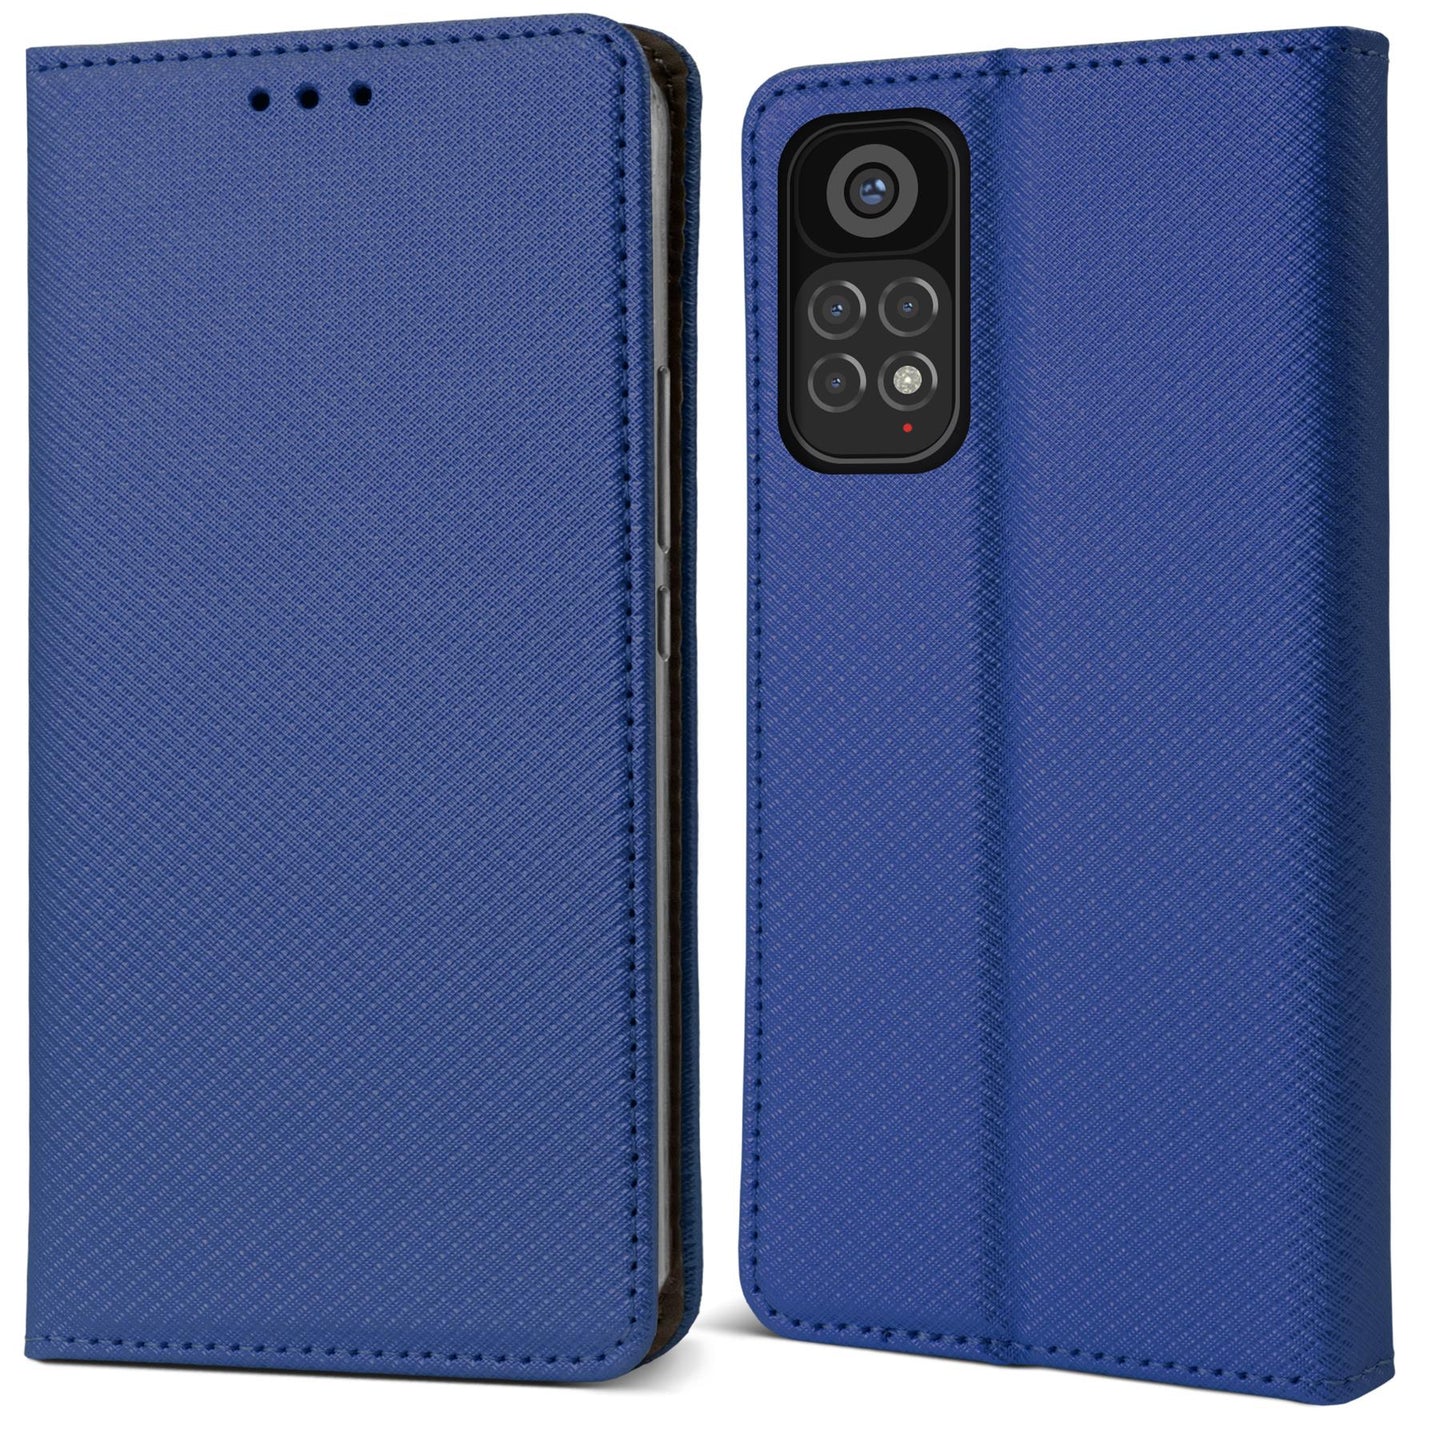 Moozy Case Flip Cover for Xiaomi Redmi Note 11 Pro 5G/4G, Dark Blue - Smart Magnetic Flip Case Flip Folio Wallet Case with Card Holder and Stand, Credit Card Slots, Kickstand Function